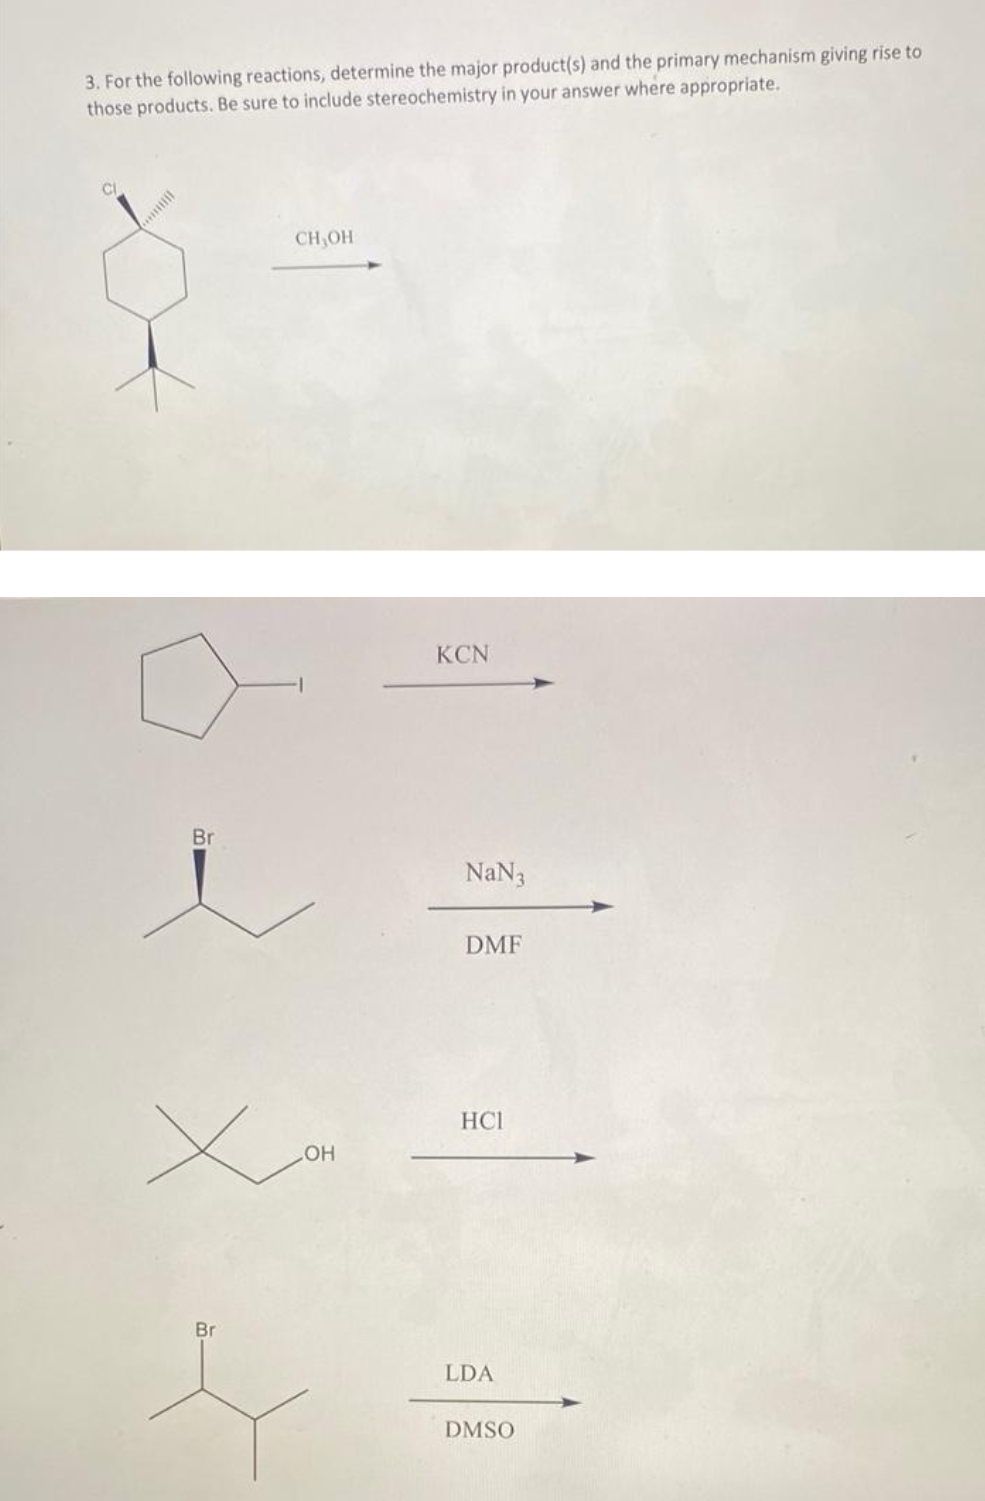 3. For the following reactions, determine the major product(s) and the primary mechanism giving rise to
those products. Be sure to include stereochemistry in your answer where appropriate.
Br
CH,OH
LOH
Br
s
KCN
NaN 3
DMF
HCI
LDA
DMSO